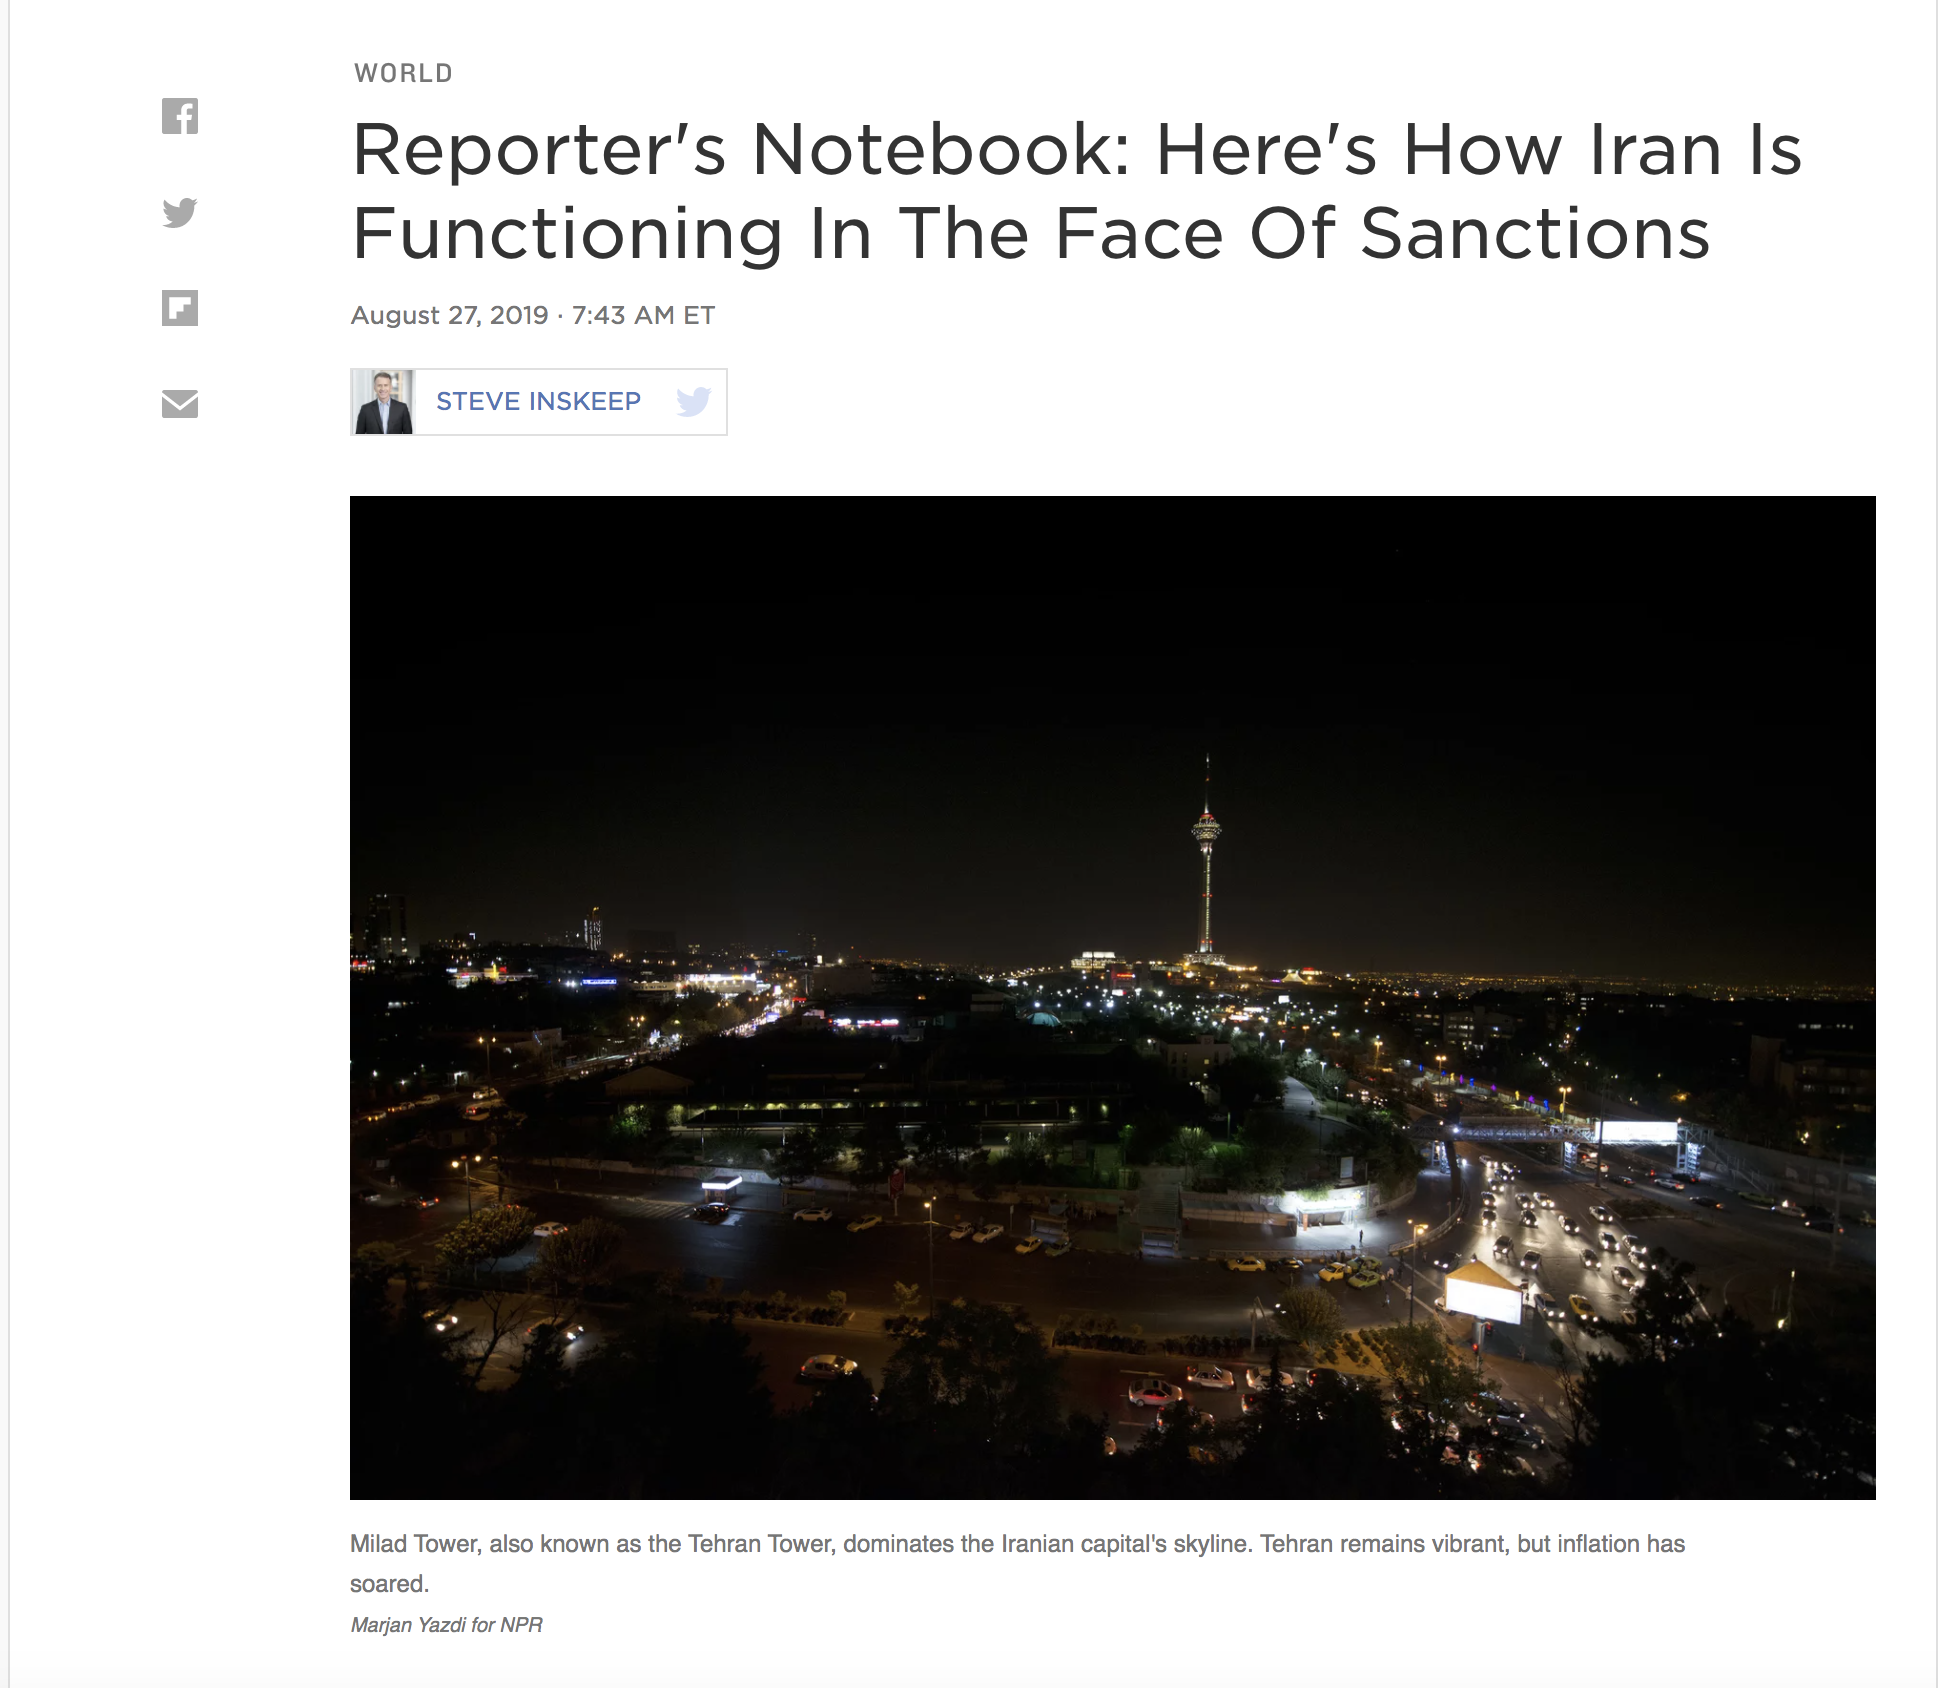 Reporter's Notebook: Here's How Iran Is Functioning In The Face Of Sanctions